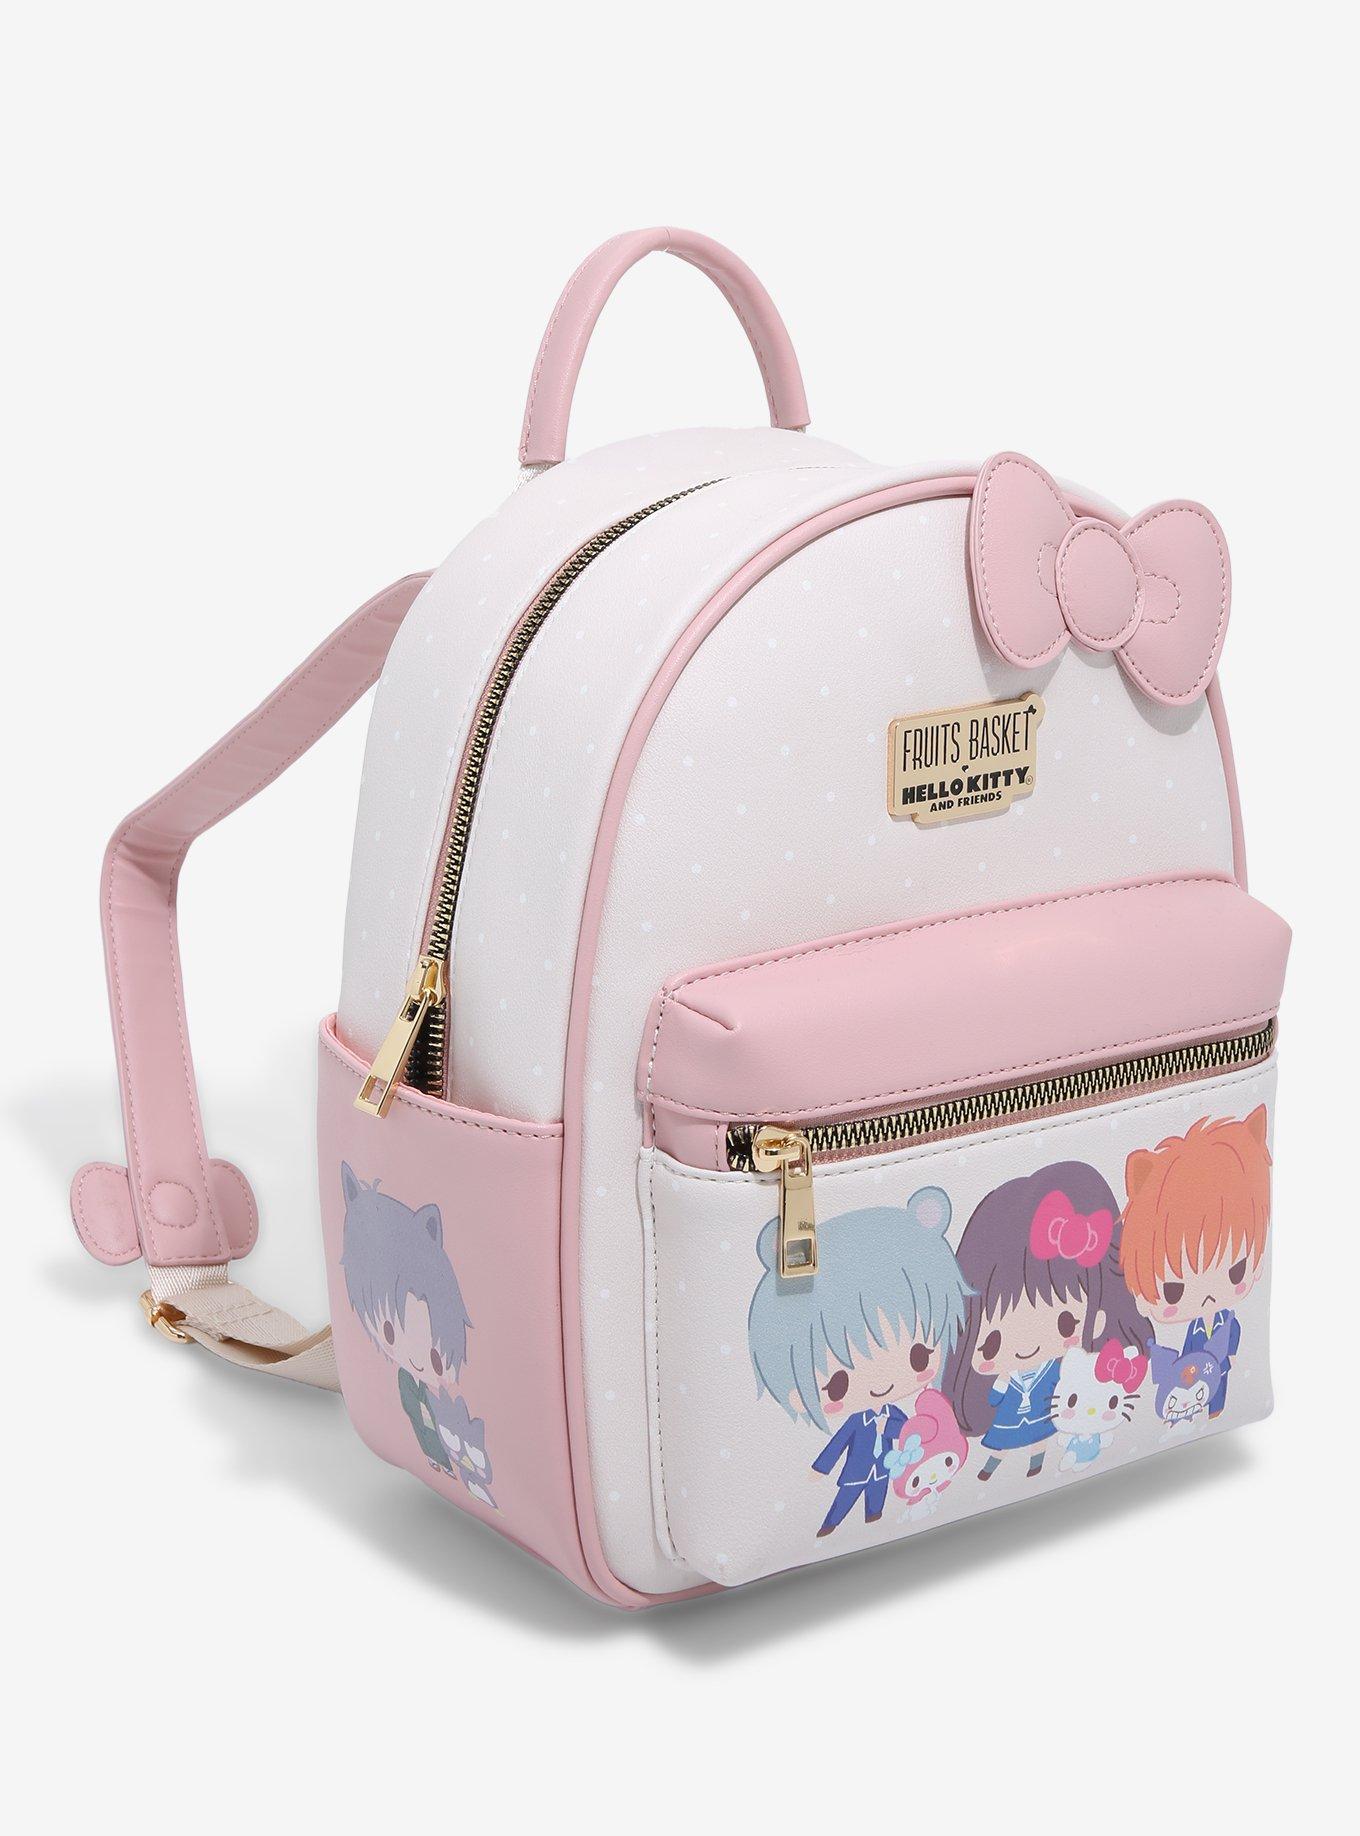 Sanrio Hello Kitty & Friends Neon Lights Mini Backpack - BoxLunch Exclusive